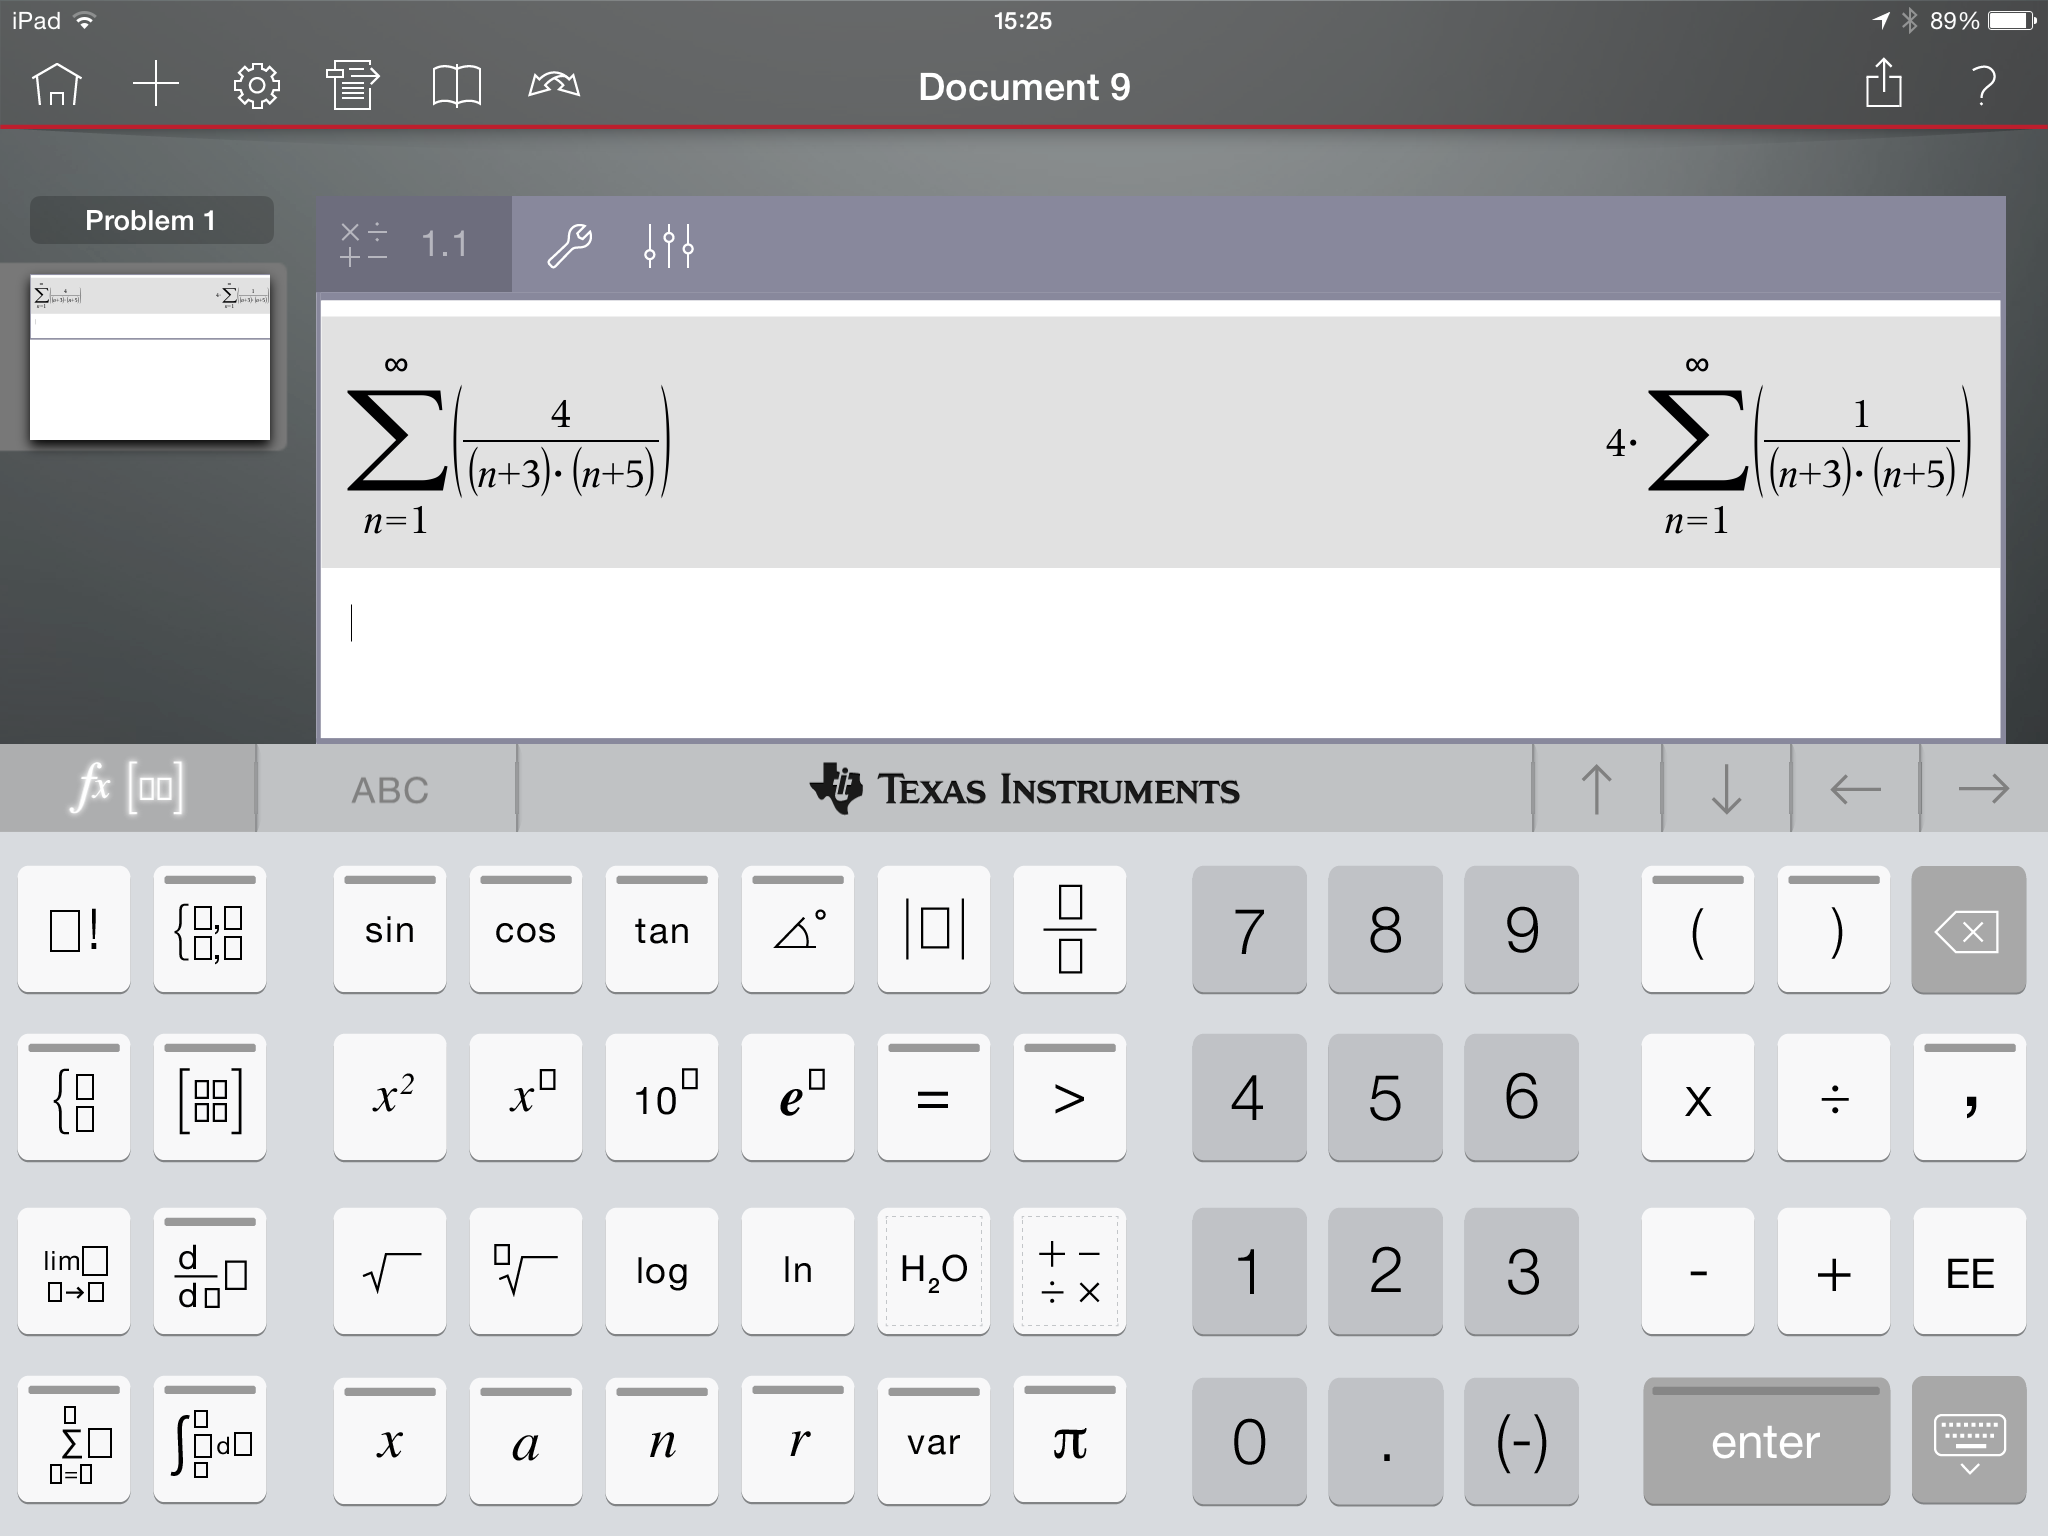 Screen shot of app, which emulates a graphing calculator. The series has been input, but instead of evaluating, the calculator returns the same series with the constant 4 factored out.